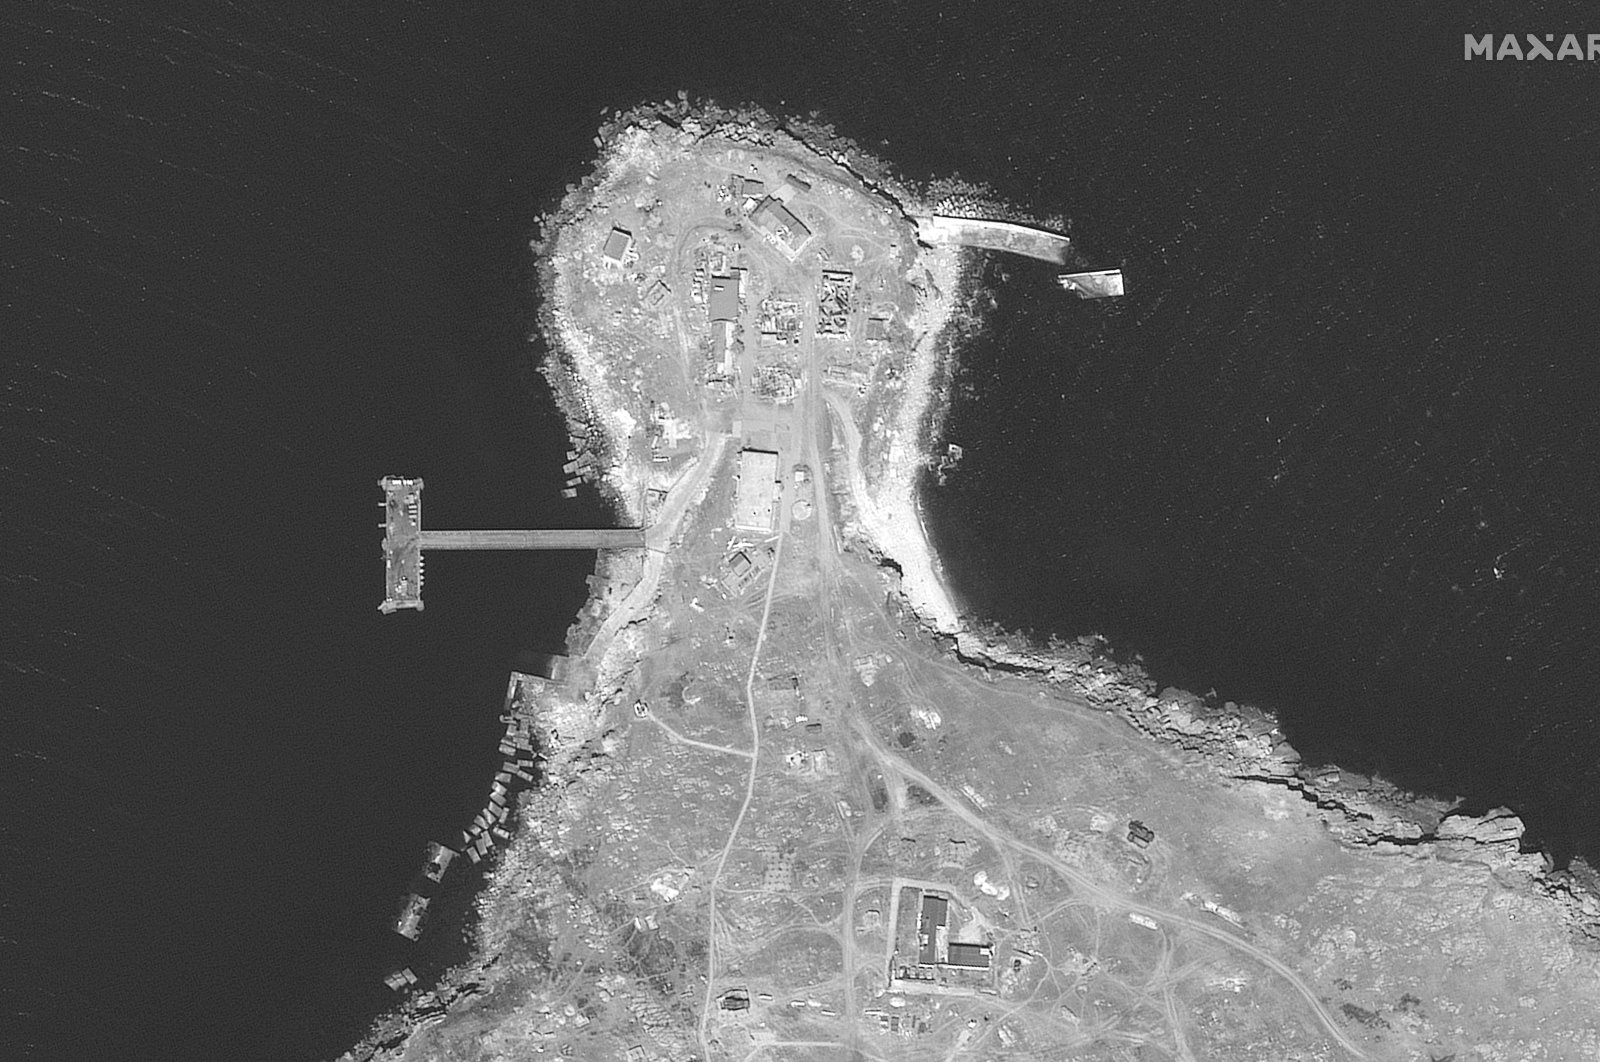 This WorldView-1 satellite black and white image from Maxar Technologies shows an overview of the northern end of Snake Island, in the Black Sea, June 17, 2022. (Satellite image ©2022 Maxar Technologies via AP)